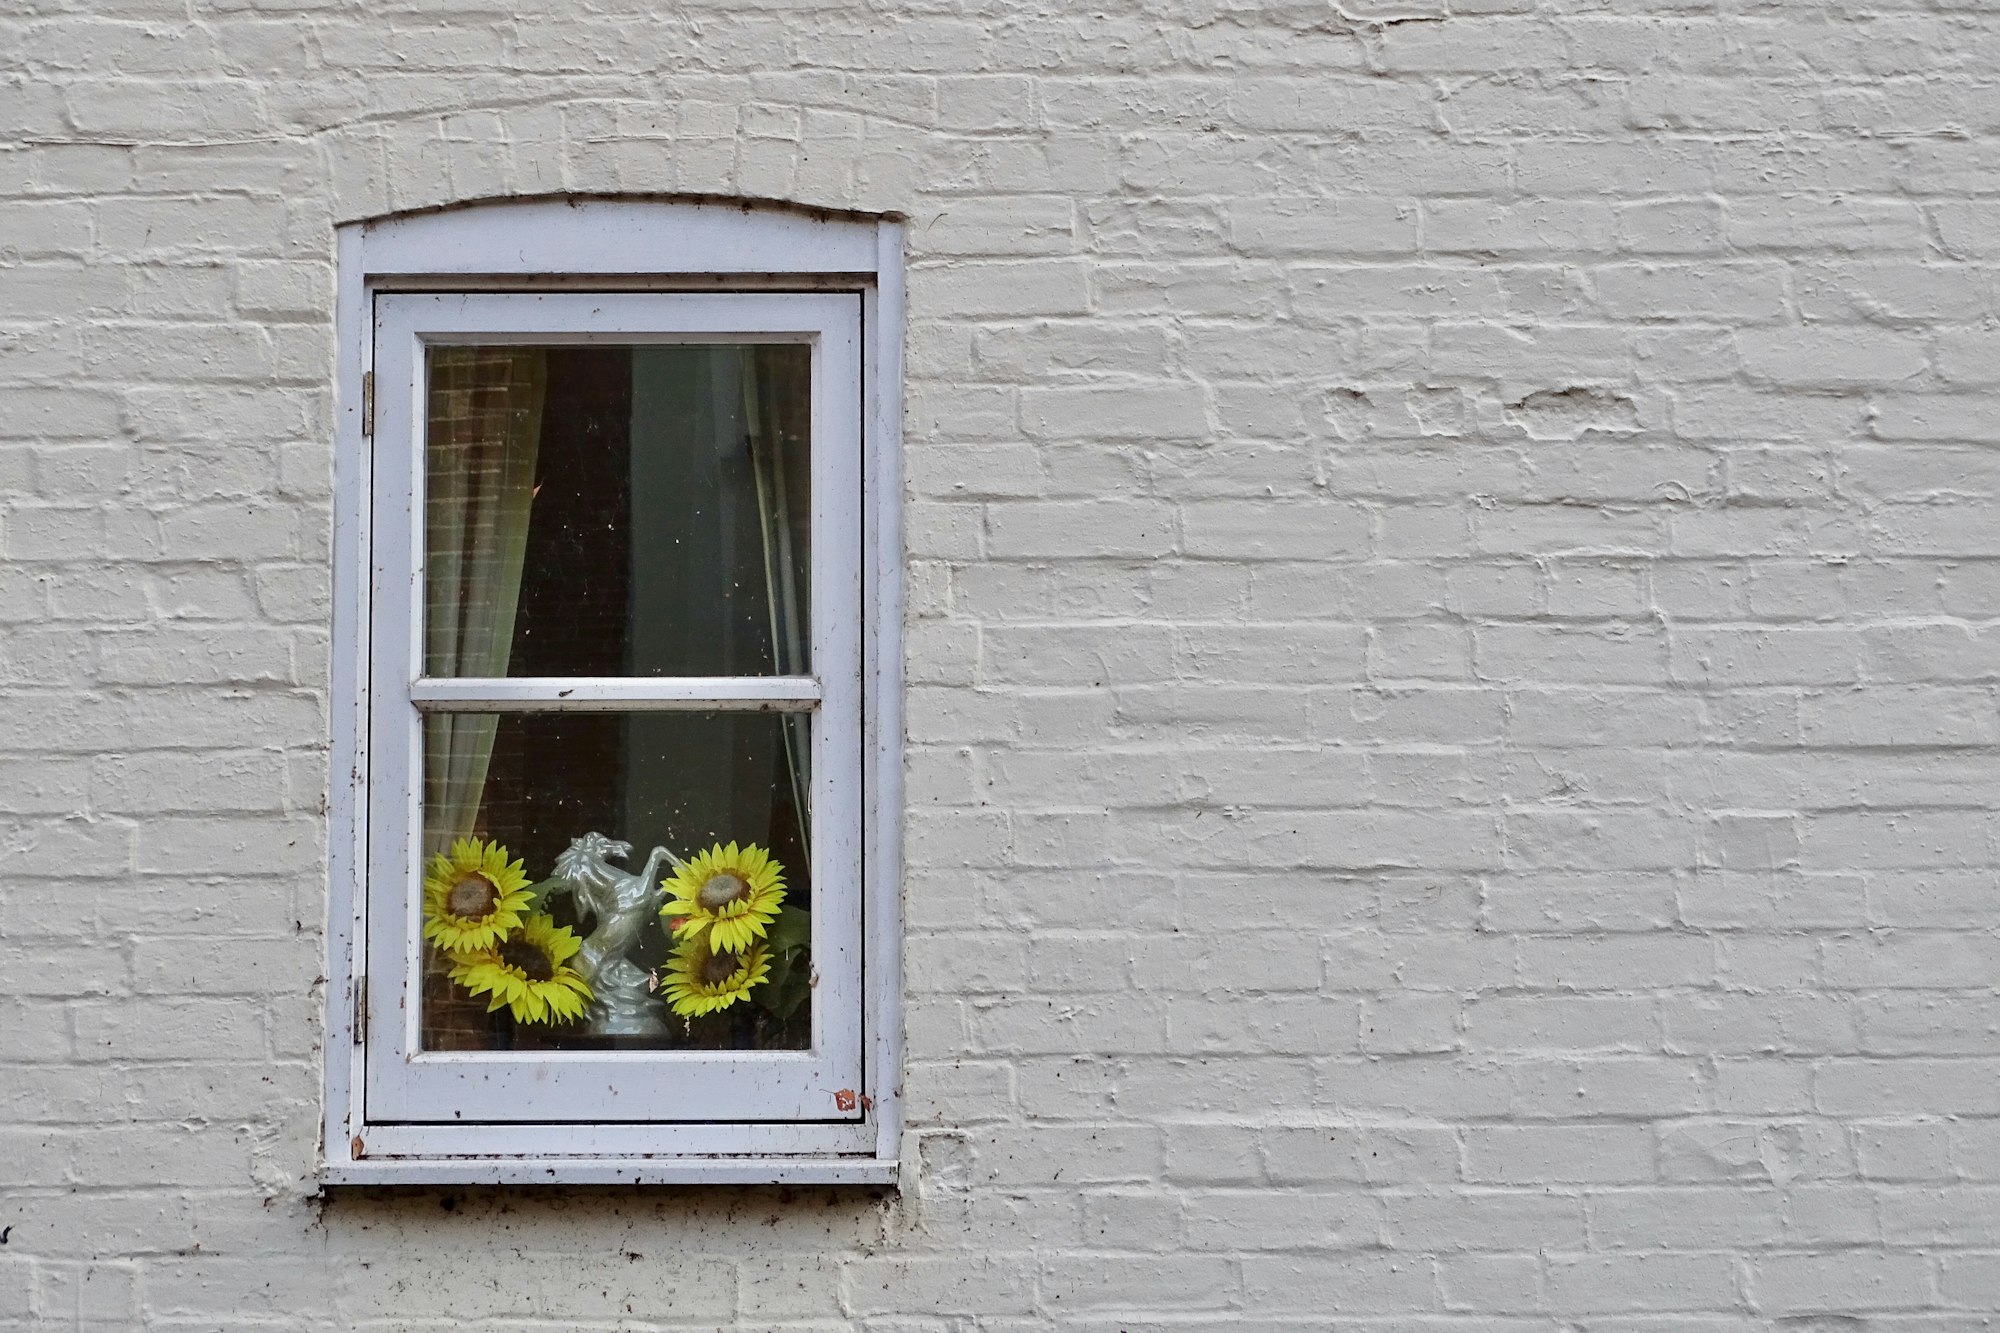 I love this little window seen in Salisbury framing the sunflowers and horse ornament inside.  